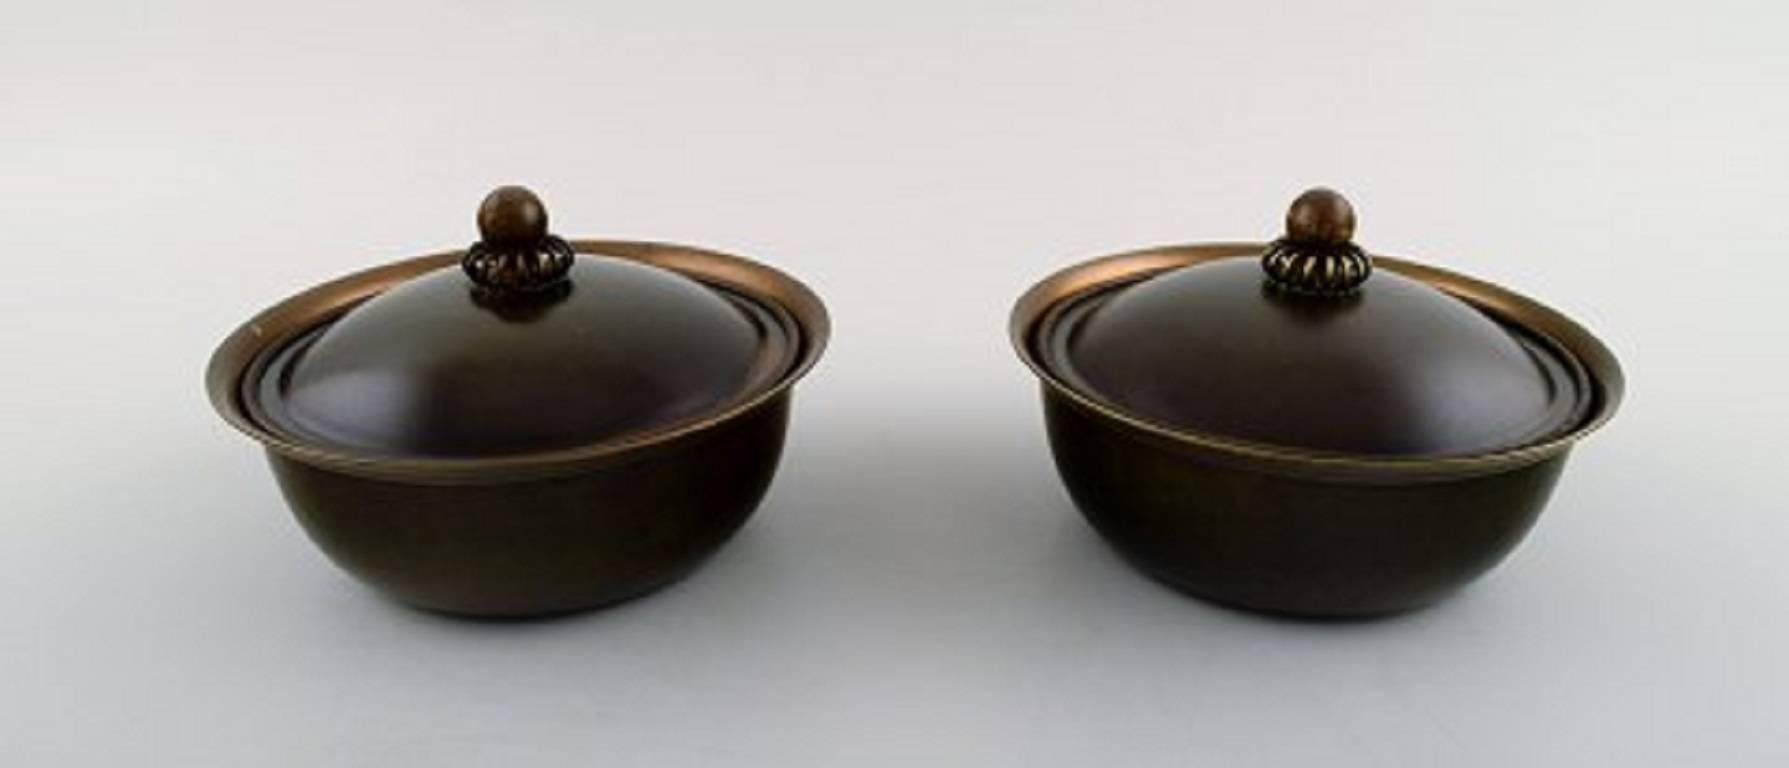 Just Andersen a pair of Art Deco boxes / jewelry boxes in alloyed bronze.
Stamped LB 1541, Denmark, 1940s.
In very good condition, beautiful patina.
Measures 14 cm. x 8 cm.